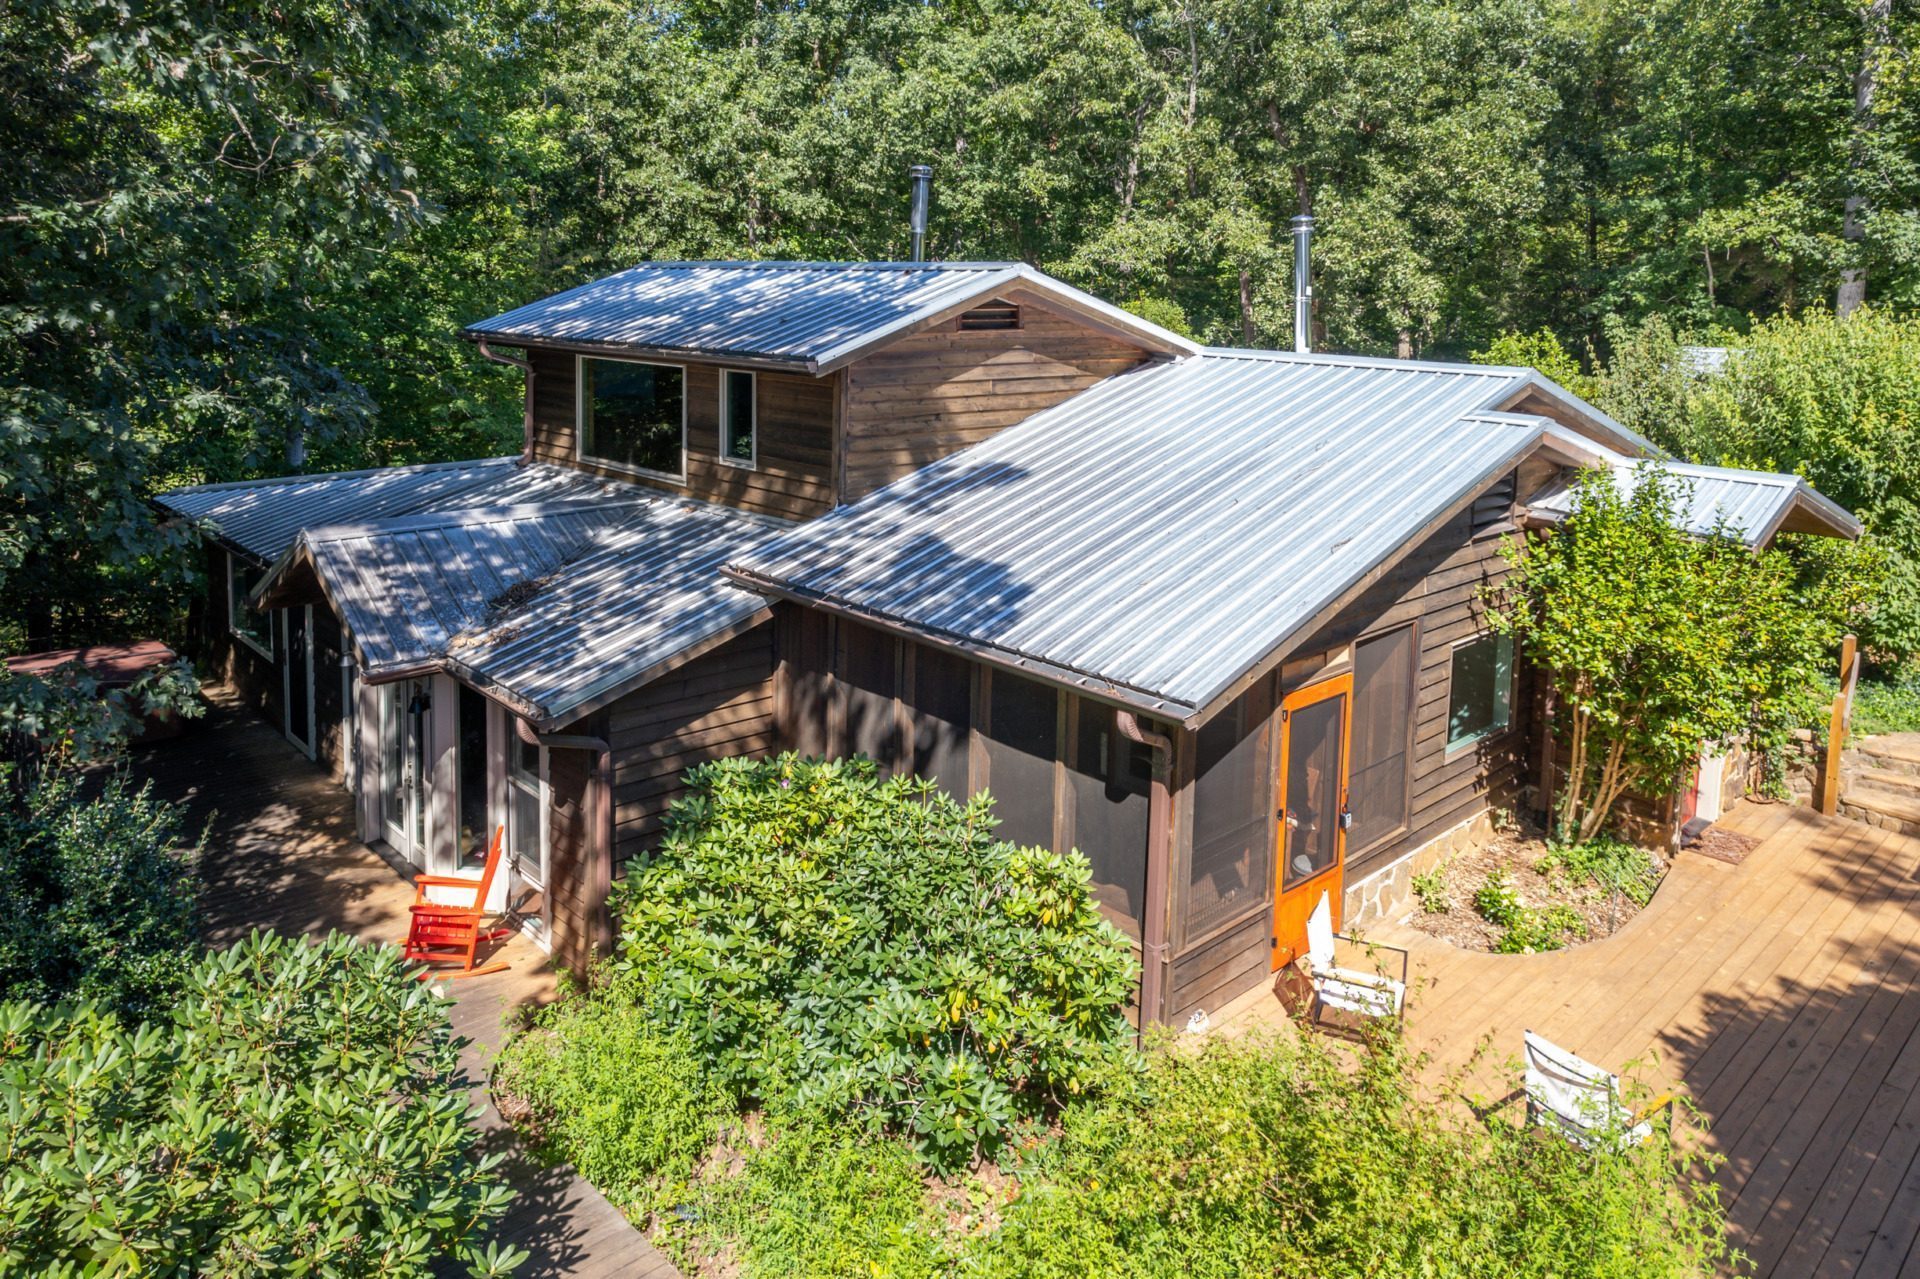 Under contract: Peace and nature: 9.21 acre farm with energy efficient home